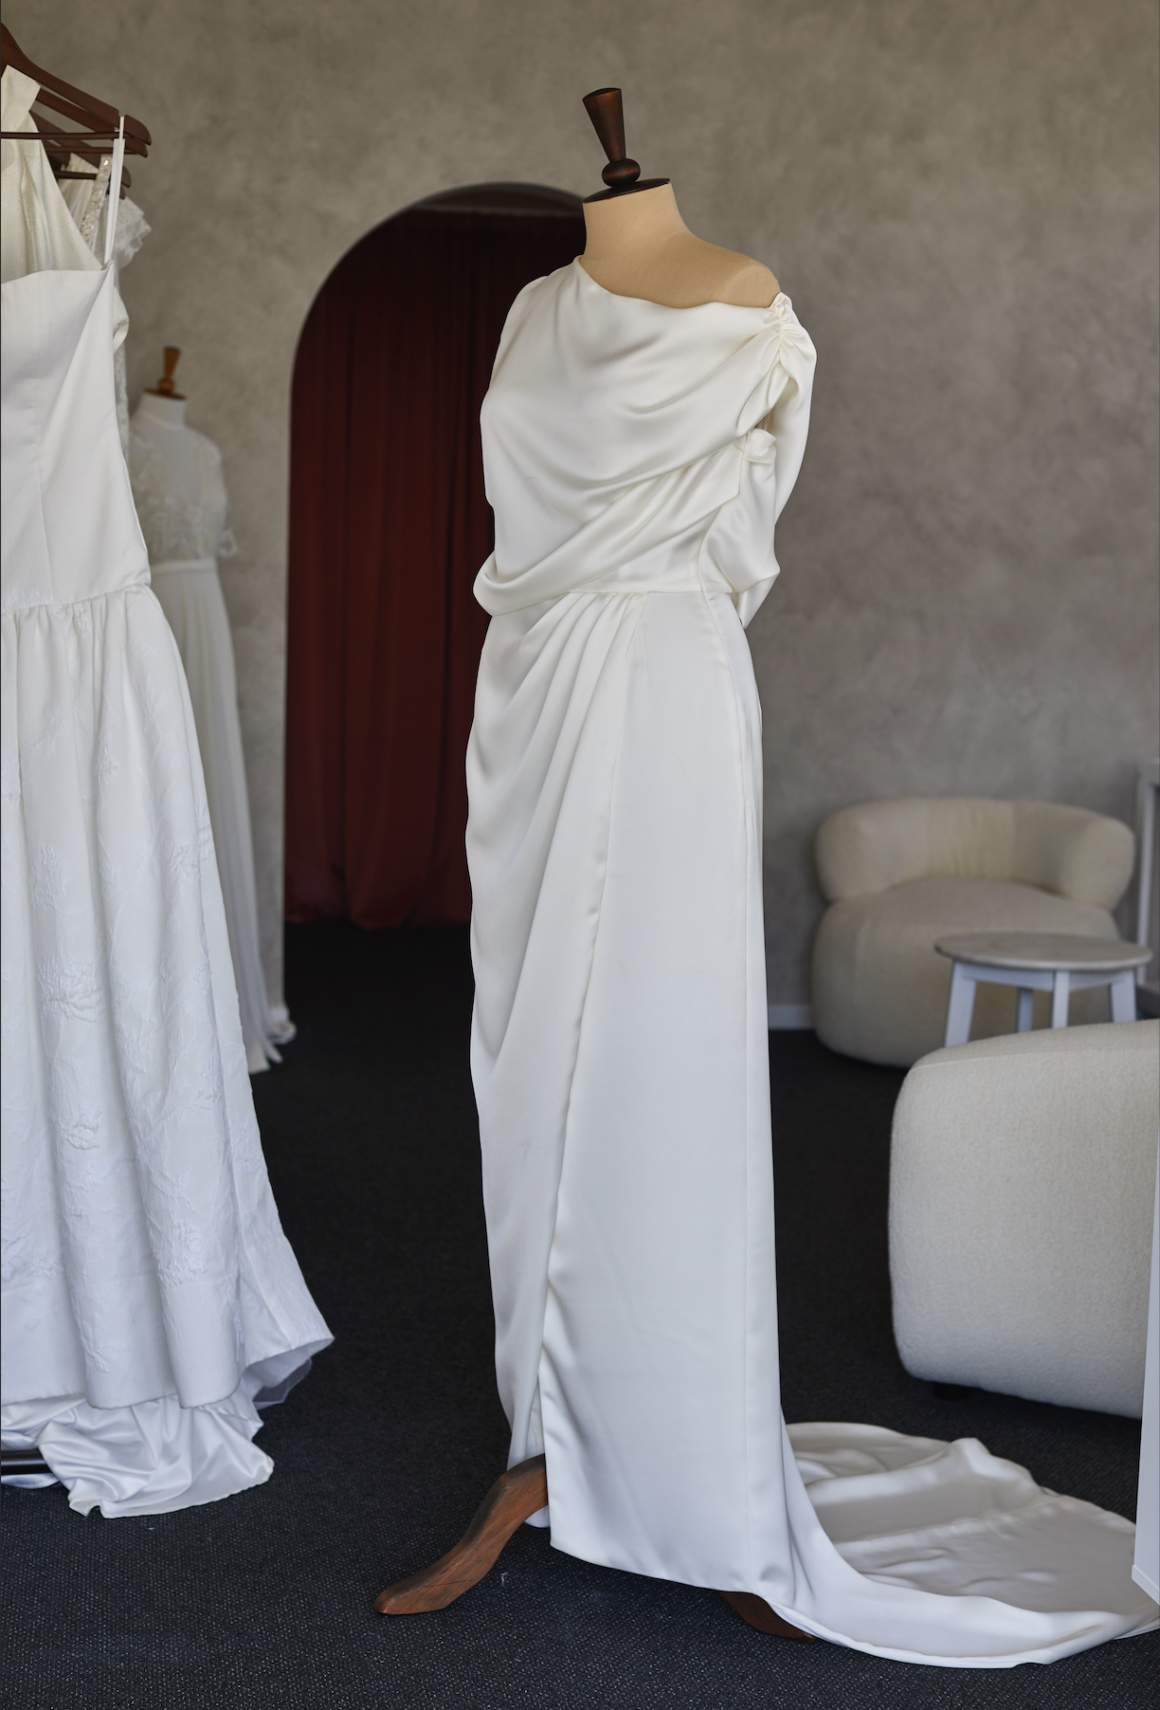 Preparing a wedding dress for a fitting appointment in her boutique